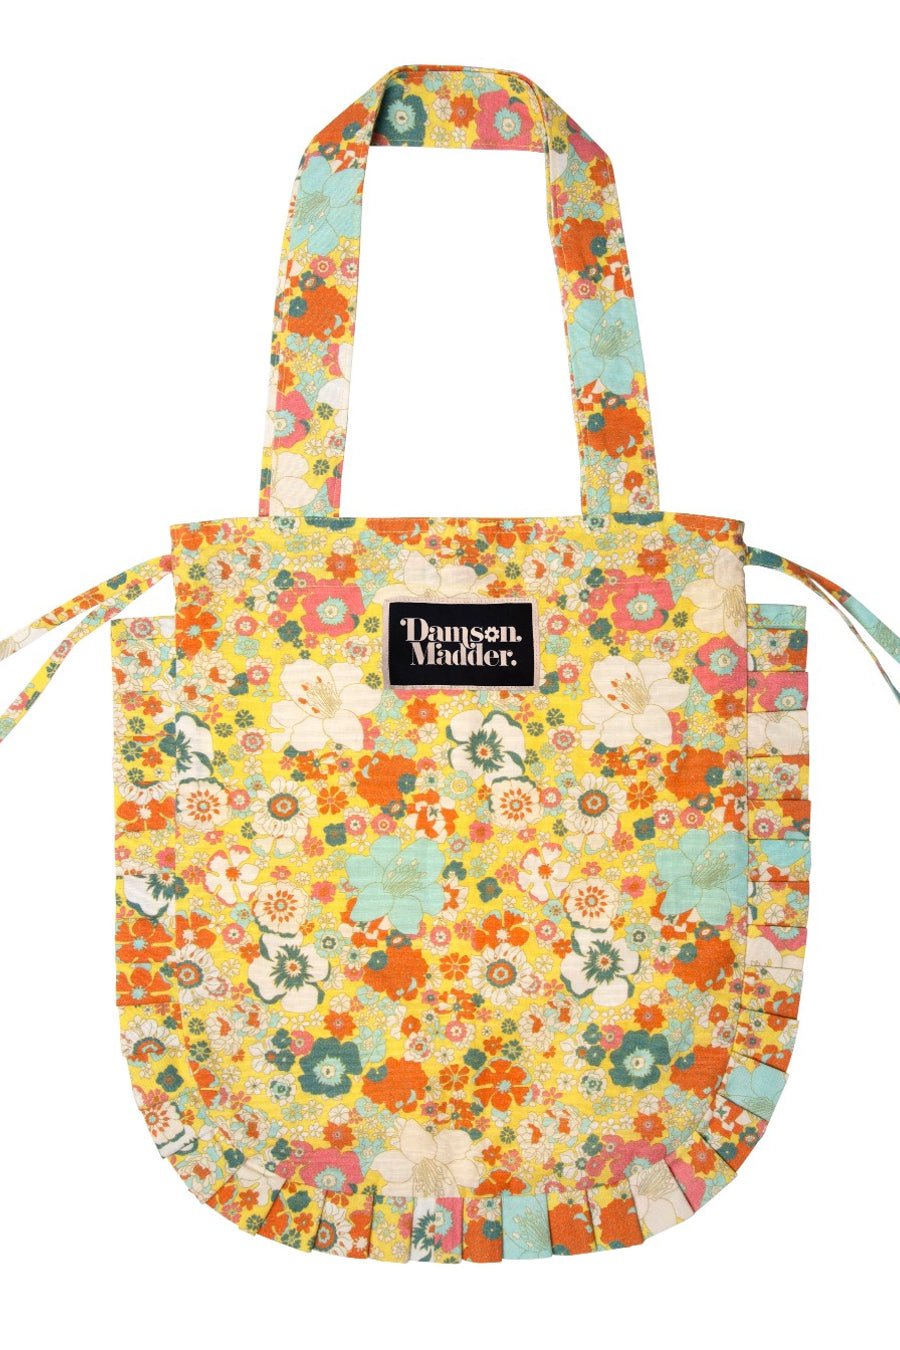 FRILL TOTE BAG IN YELLOW & BLUE FLORAL PRINT